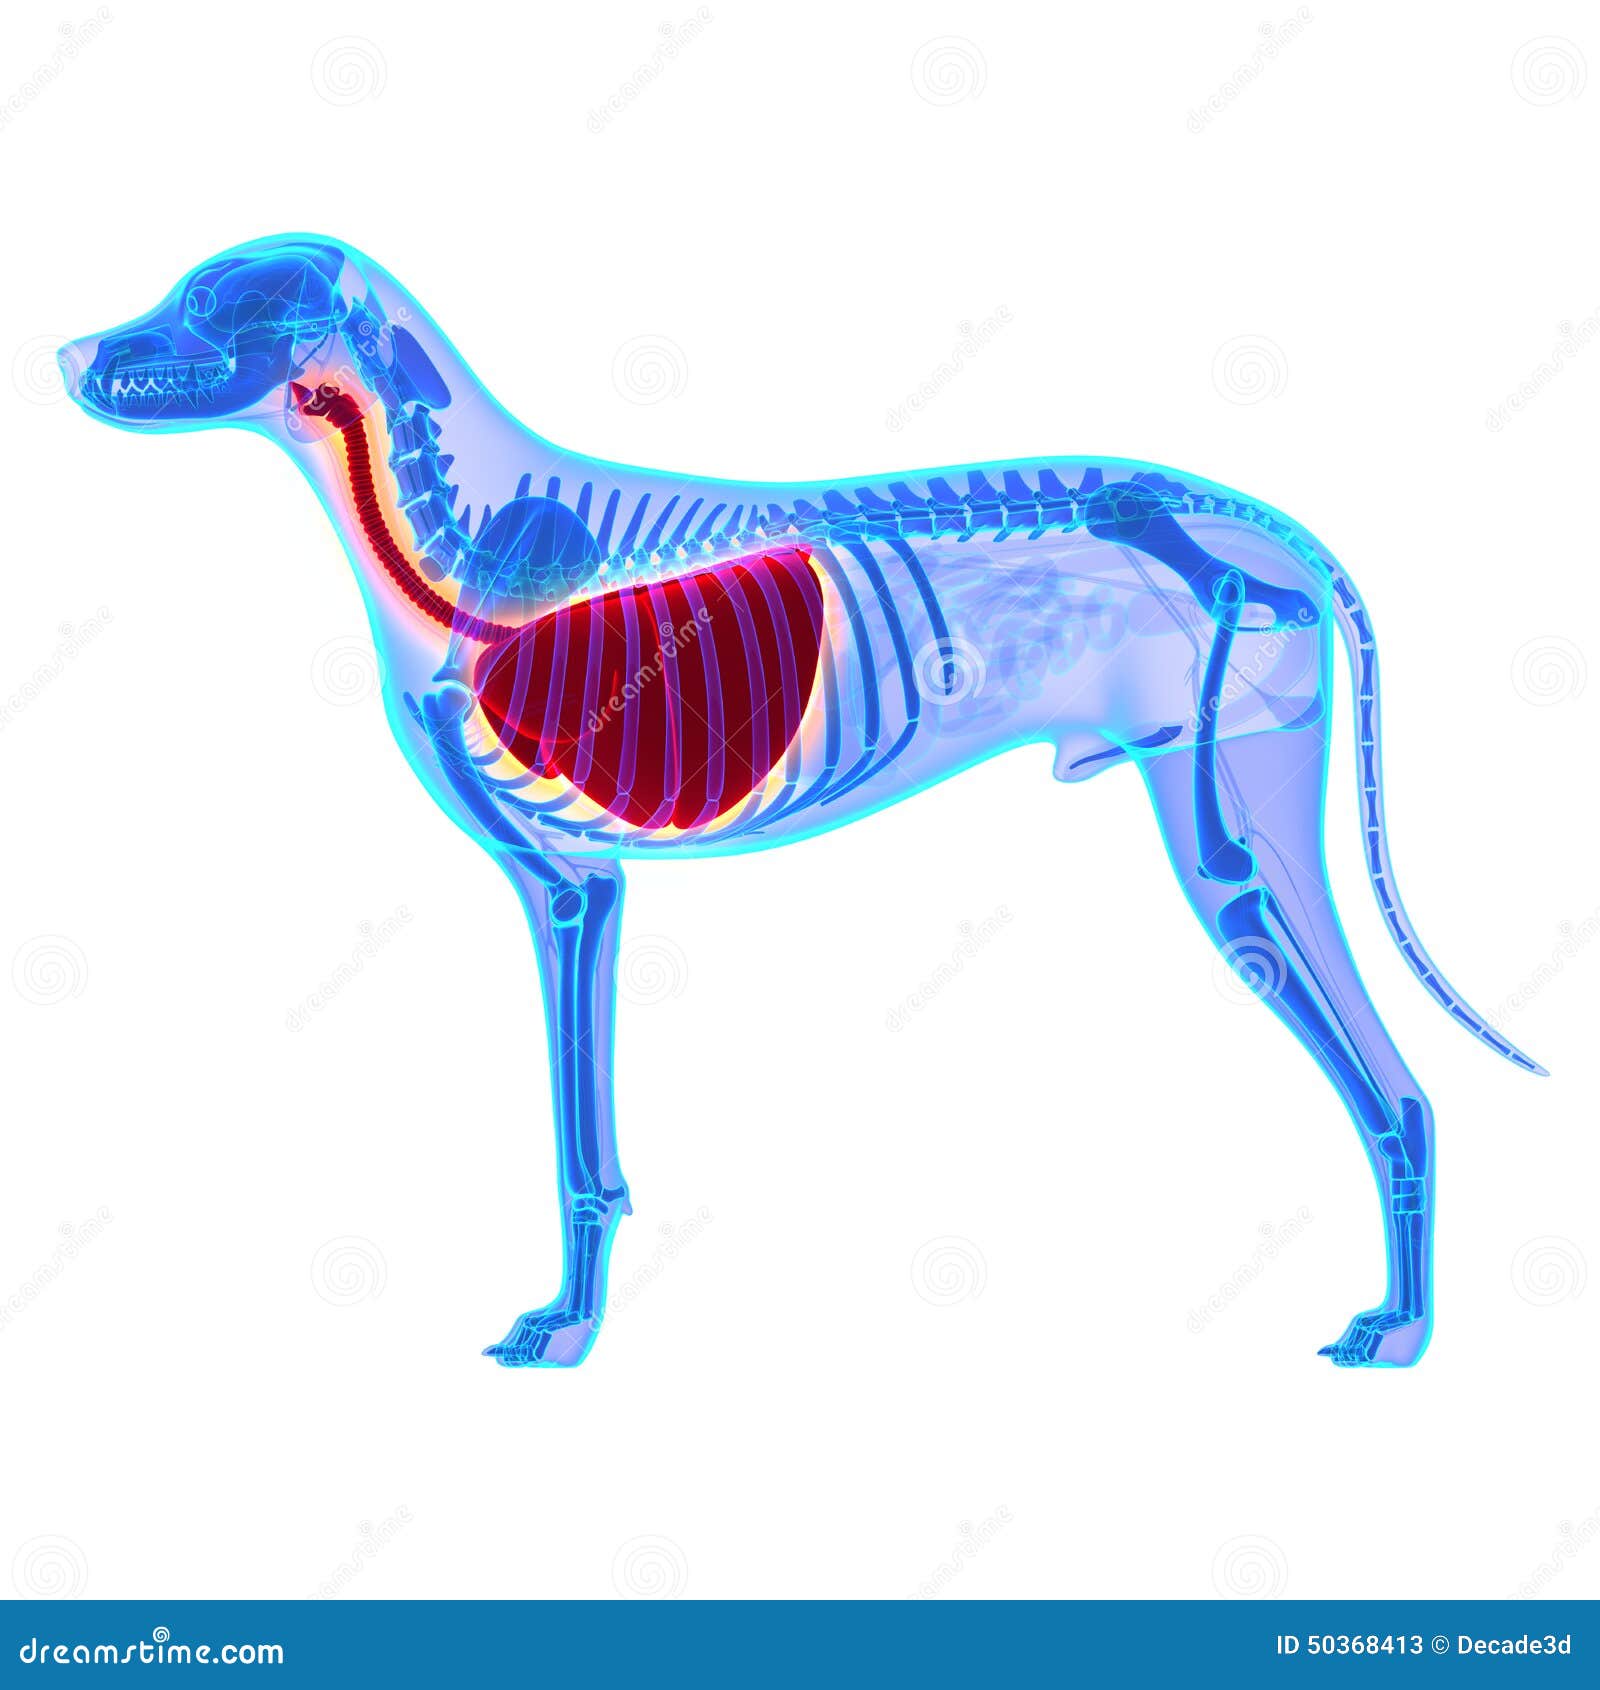 dog thorax / lungs anatomy - canis lupus familiaris anatomy - is